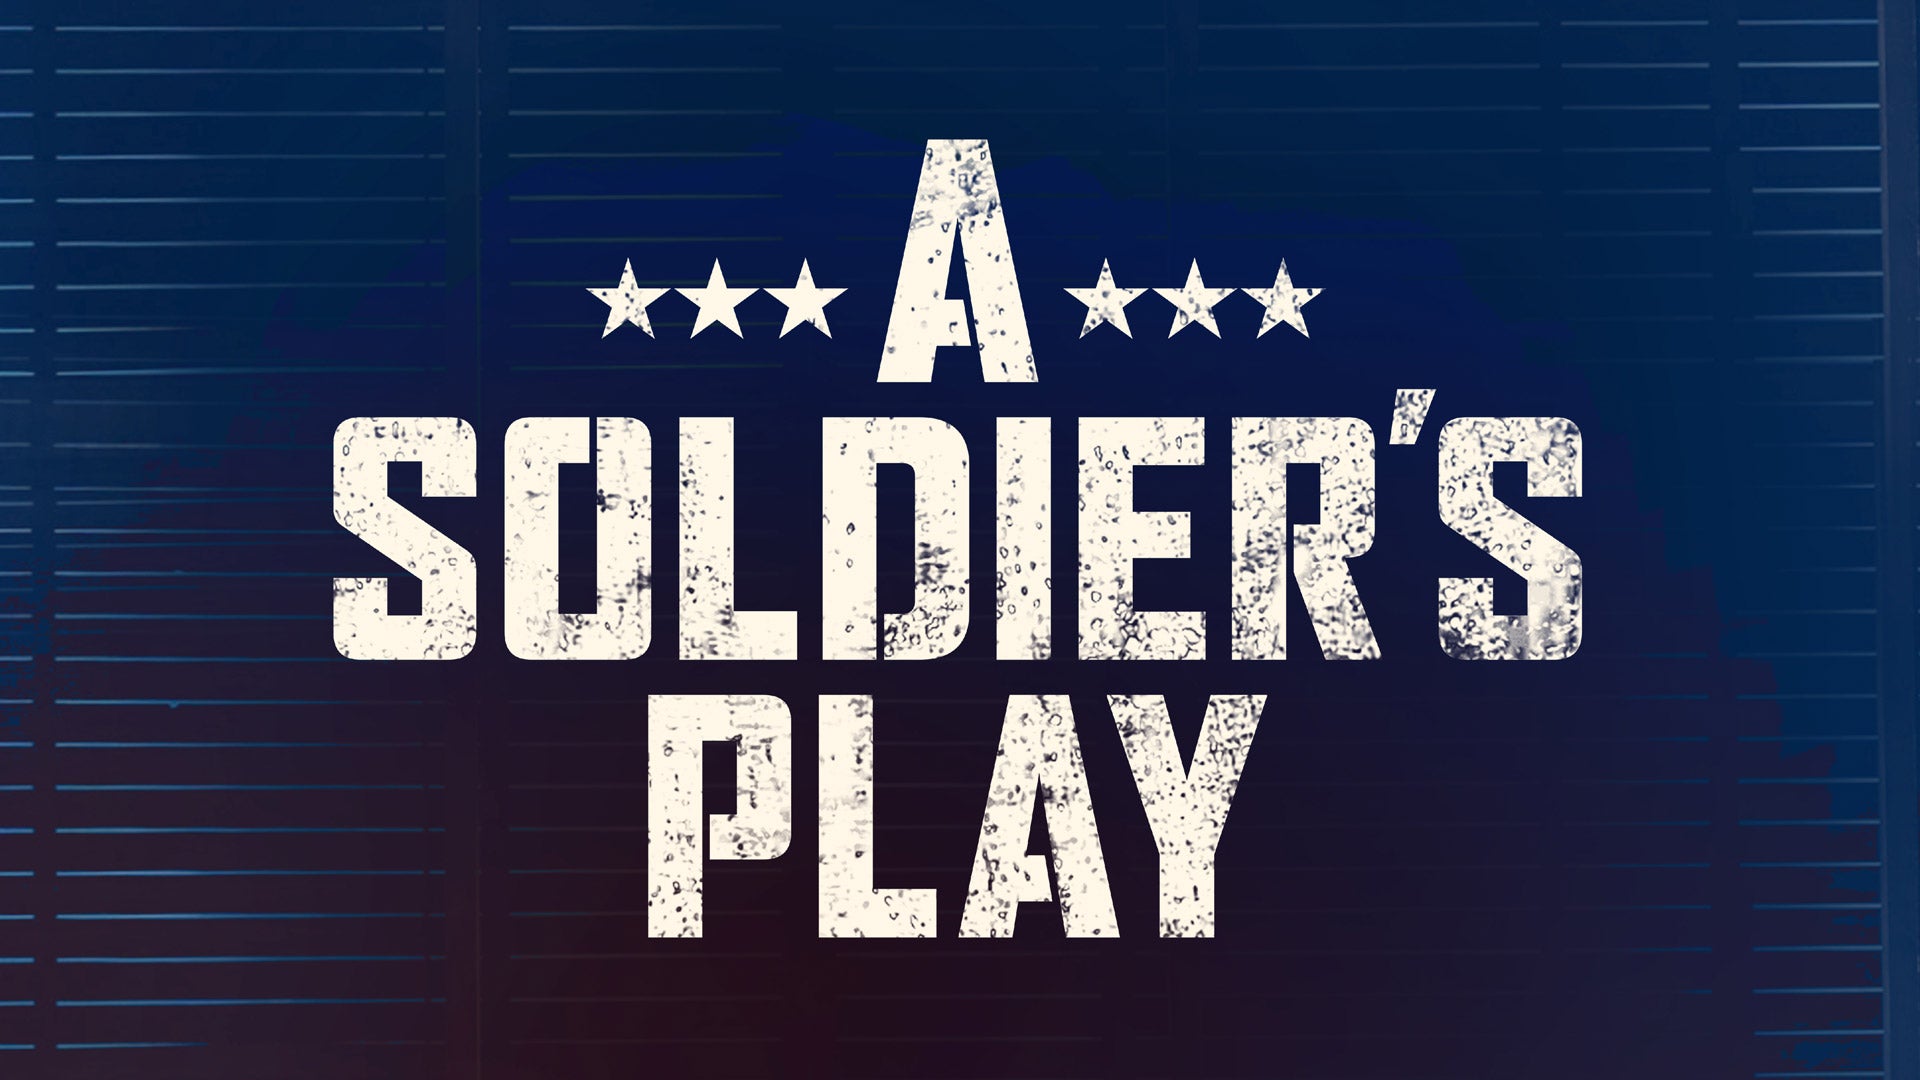 A Soldier’s Play